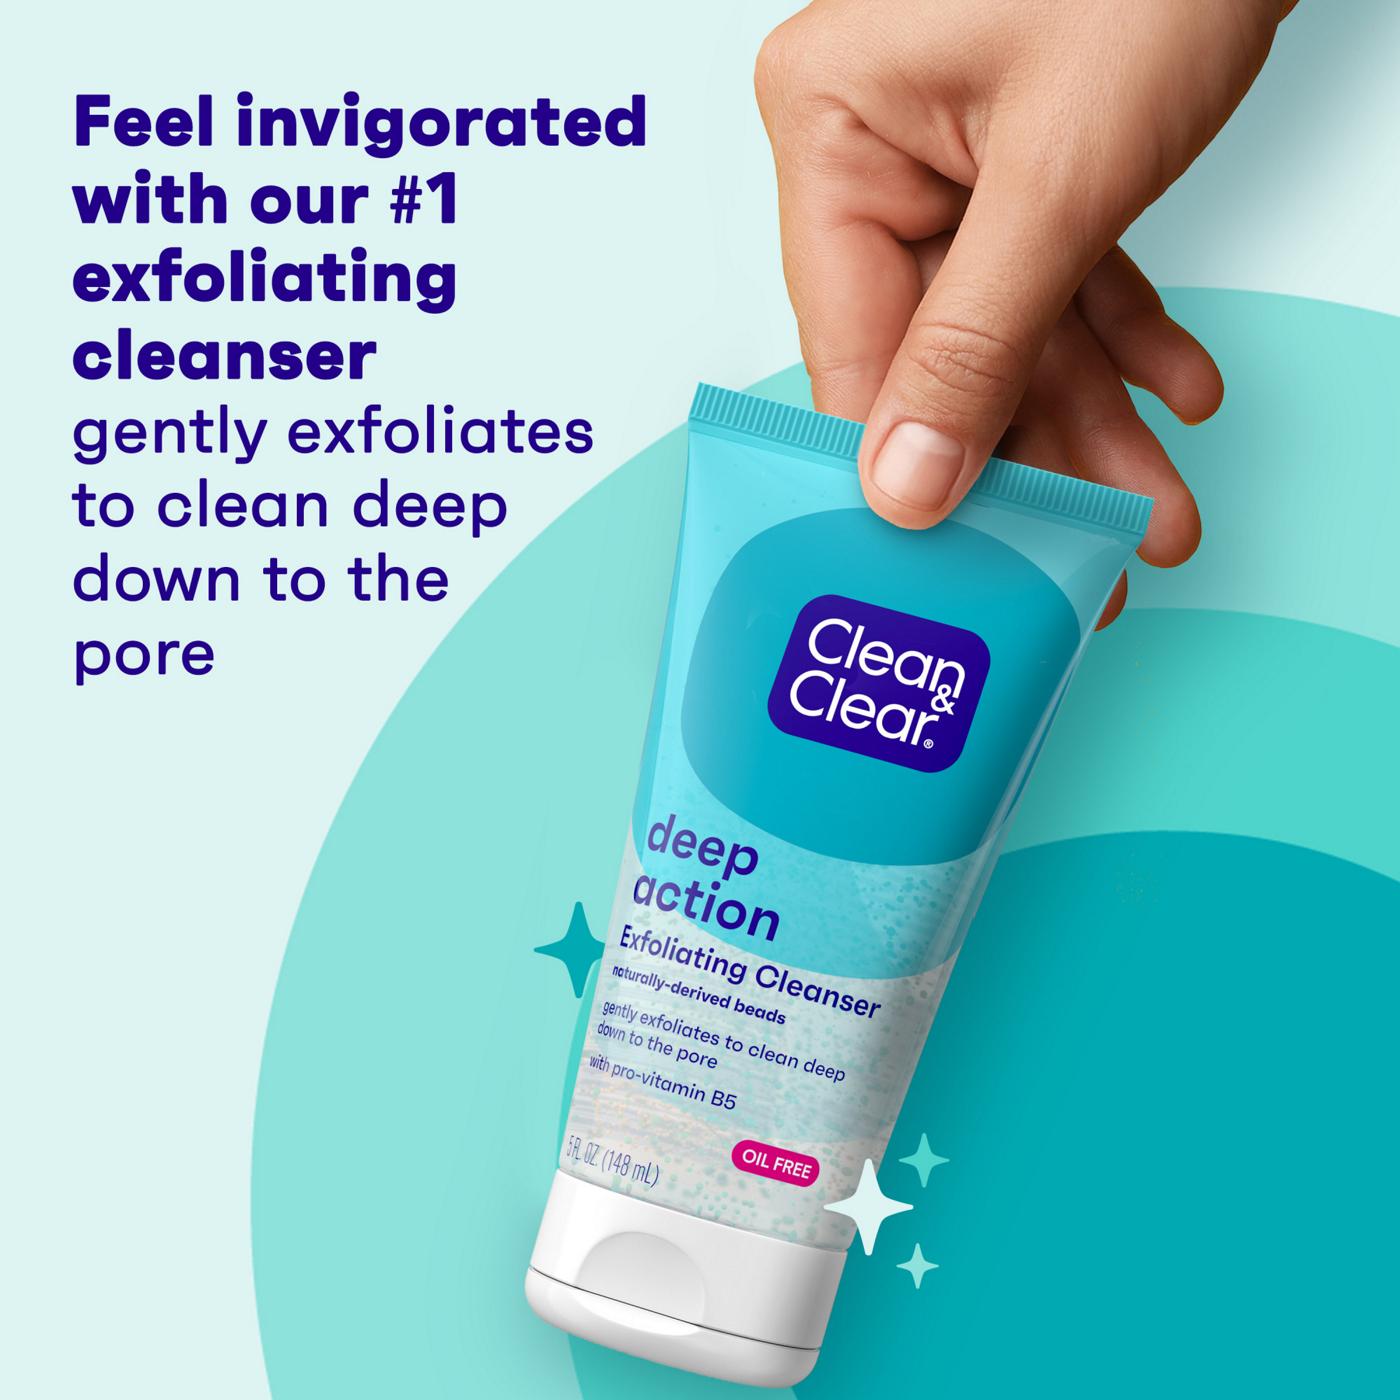 Clean & Clear Deep Action Exfoliating Scrub; image 8 of 8